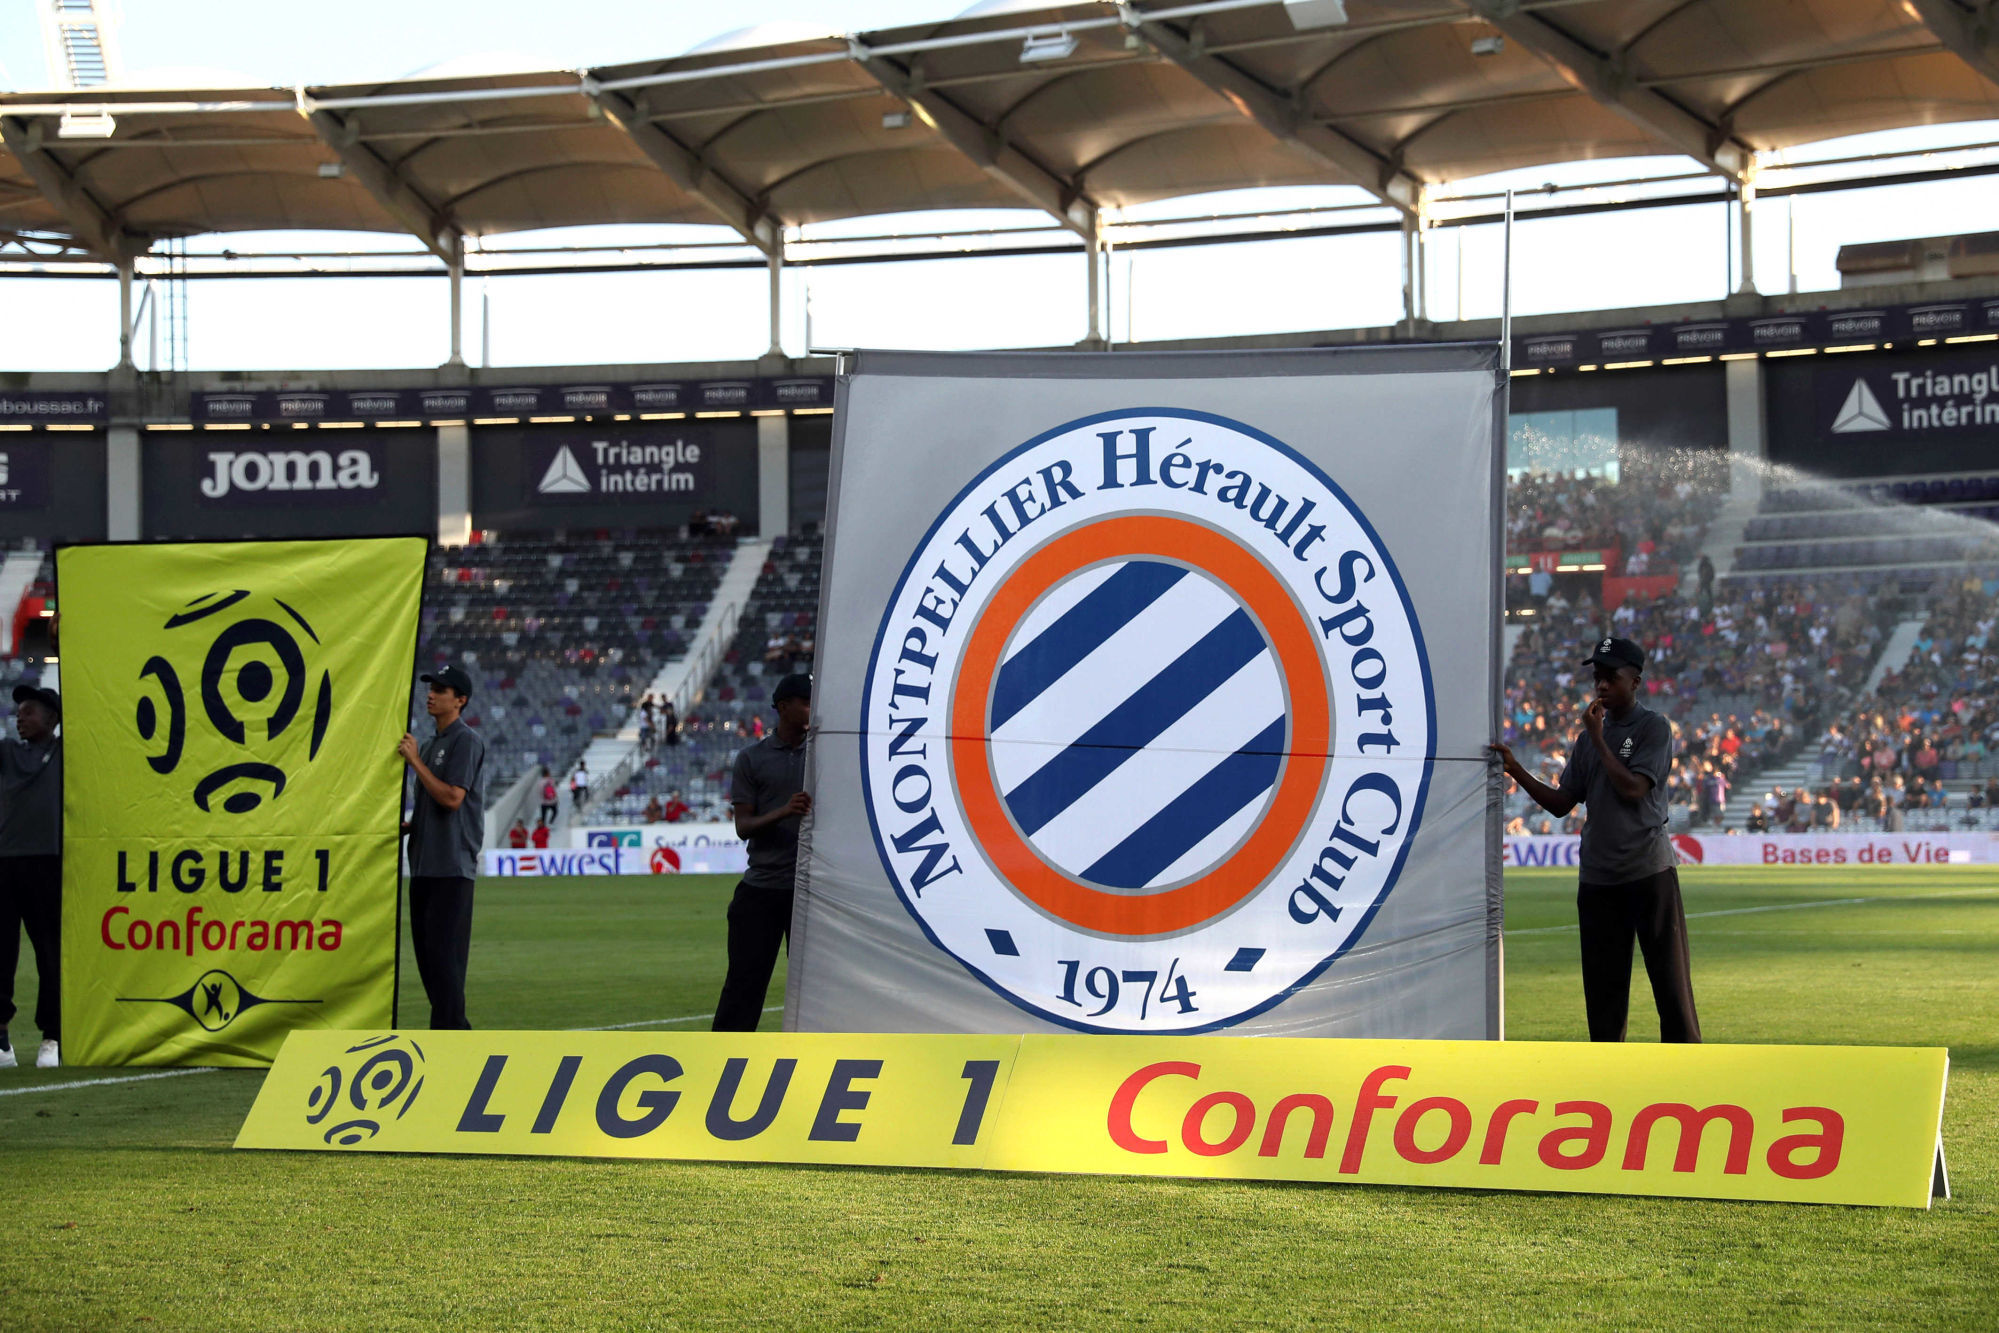 Logo Ligue 1 Conforama during the Ligue 1 match between Toulouse FC and Montpellier Herault SC at Stadium Municipal on August 12, 2017 in Toulouse, . (Photo by Manuel Blondeau/Icon Sport)